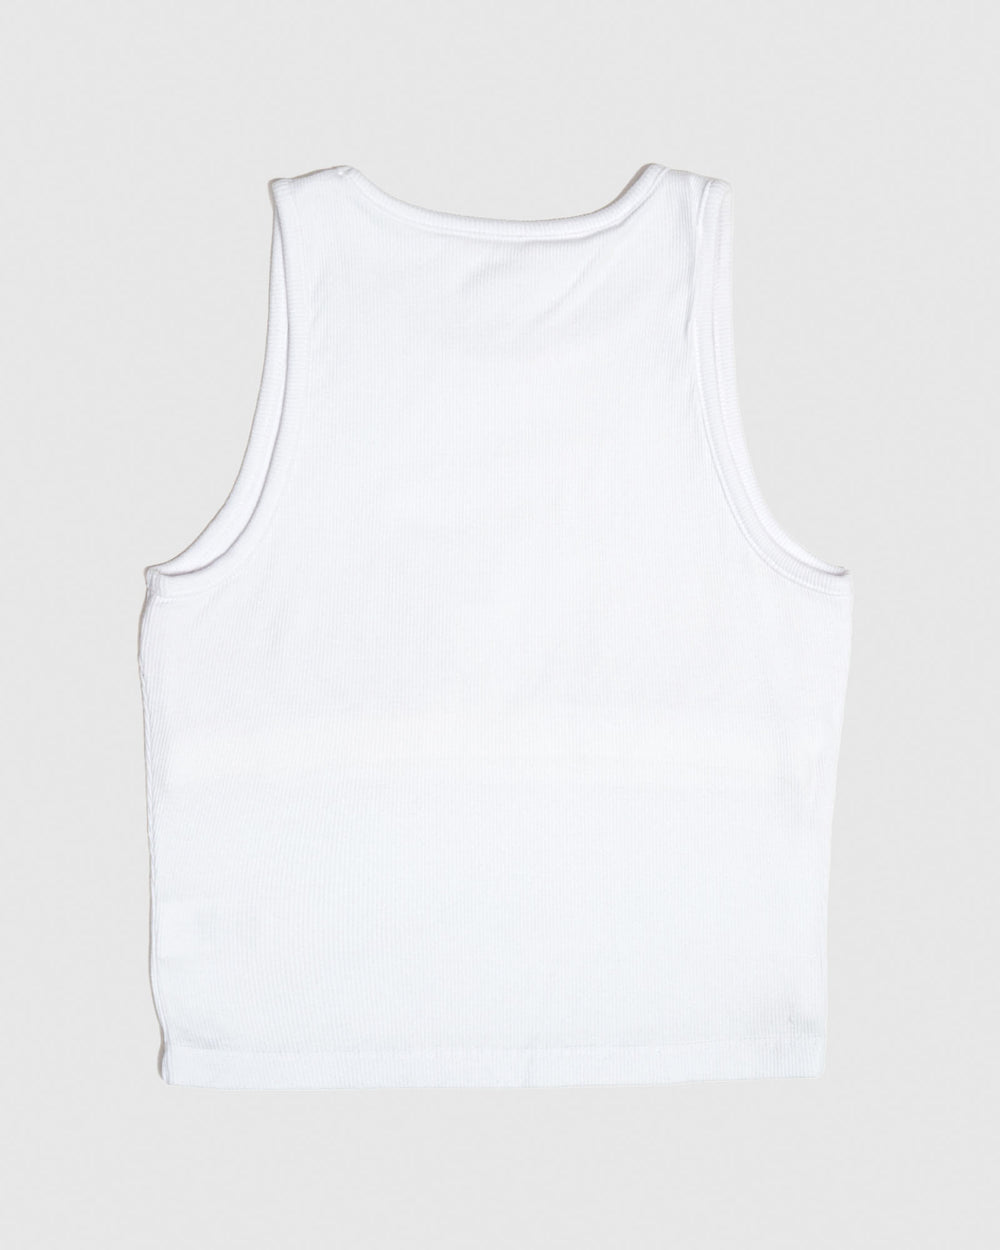 Back of white women's cut tank top#color_white